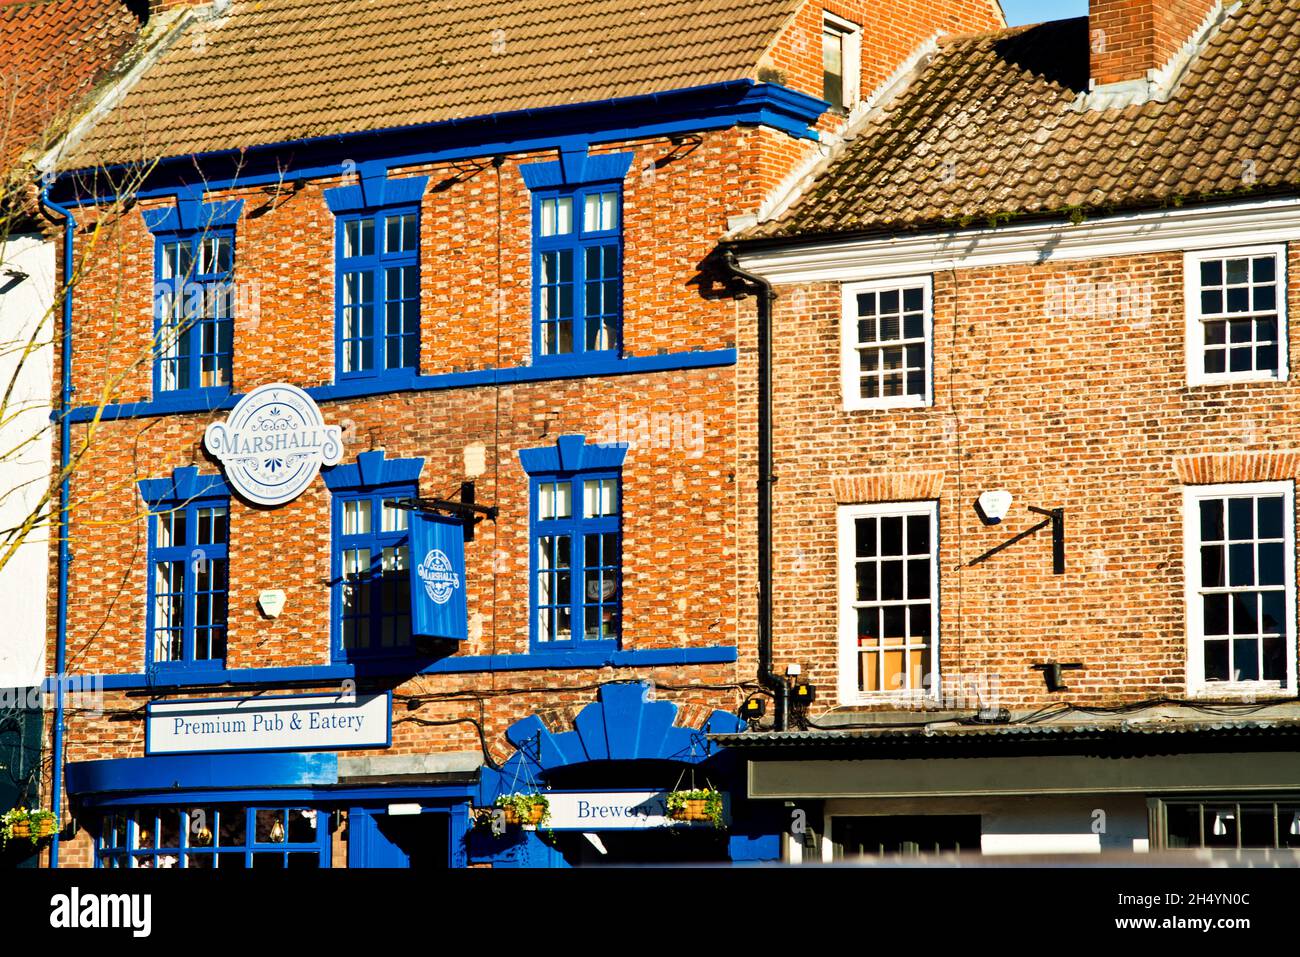 Marshalls Pub and Eatery formely The Union Arms, Yarm on Tees, England Stock Photo